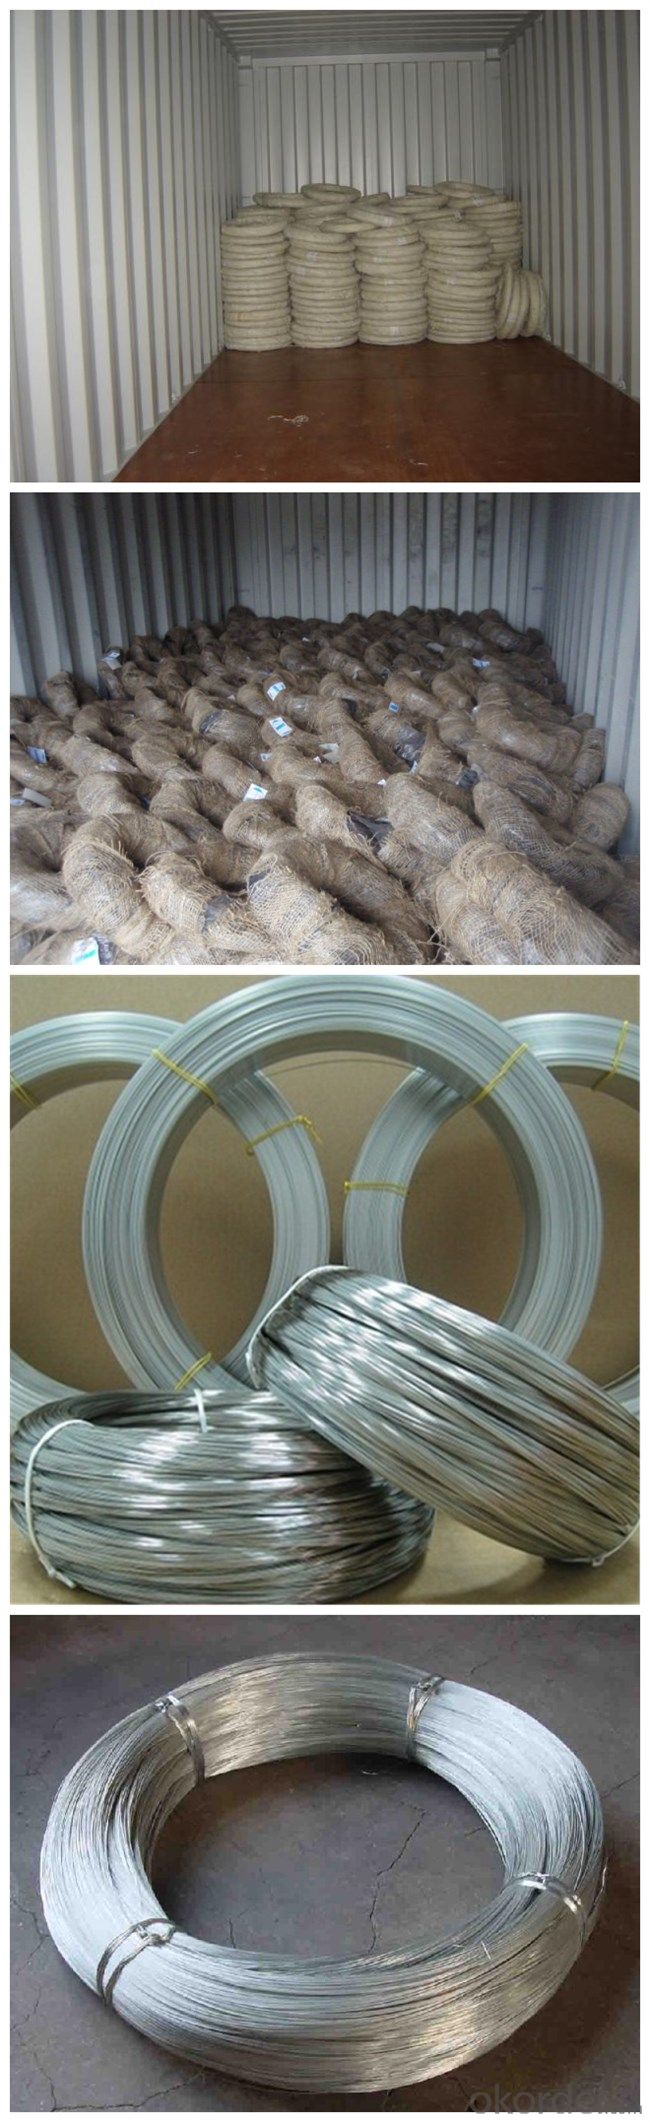 Building Materials Low Carbon Electro Hot-Dipped Galvanized Metal Wire